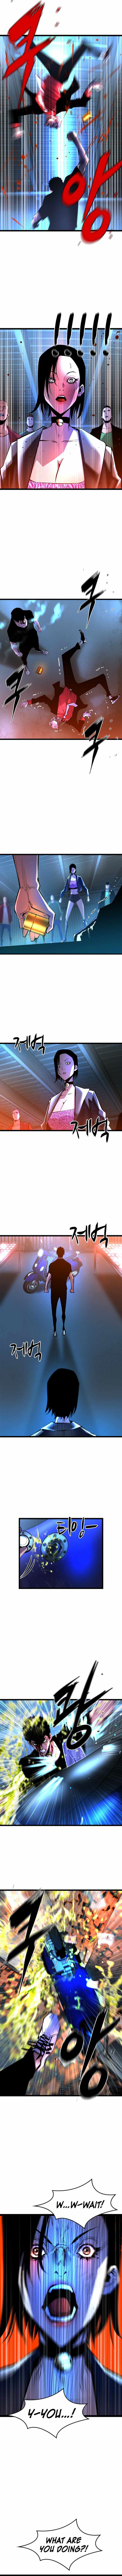 Hanlim Gym Chapter 79 page 11